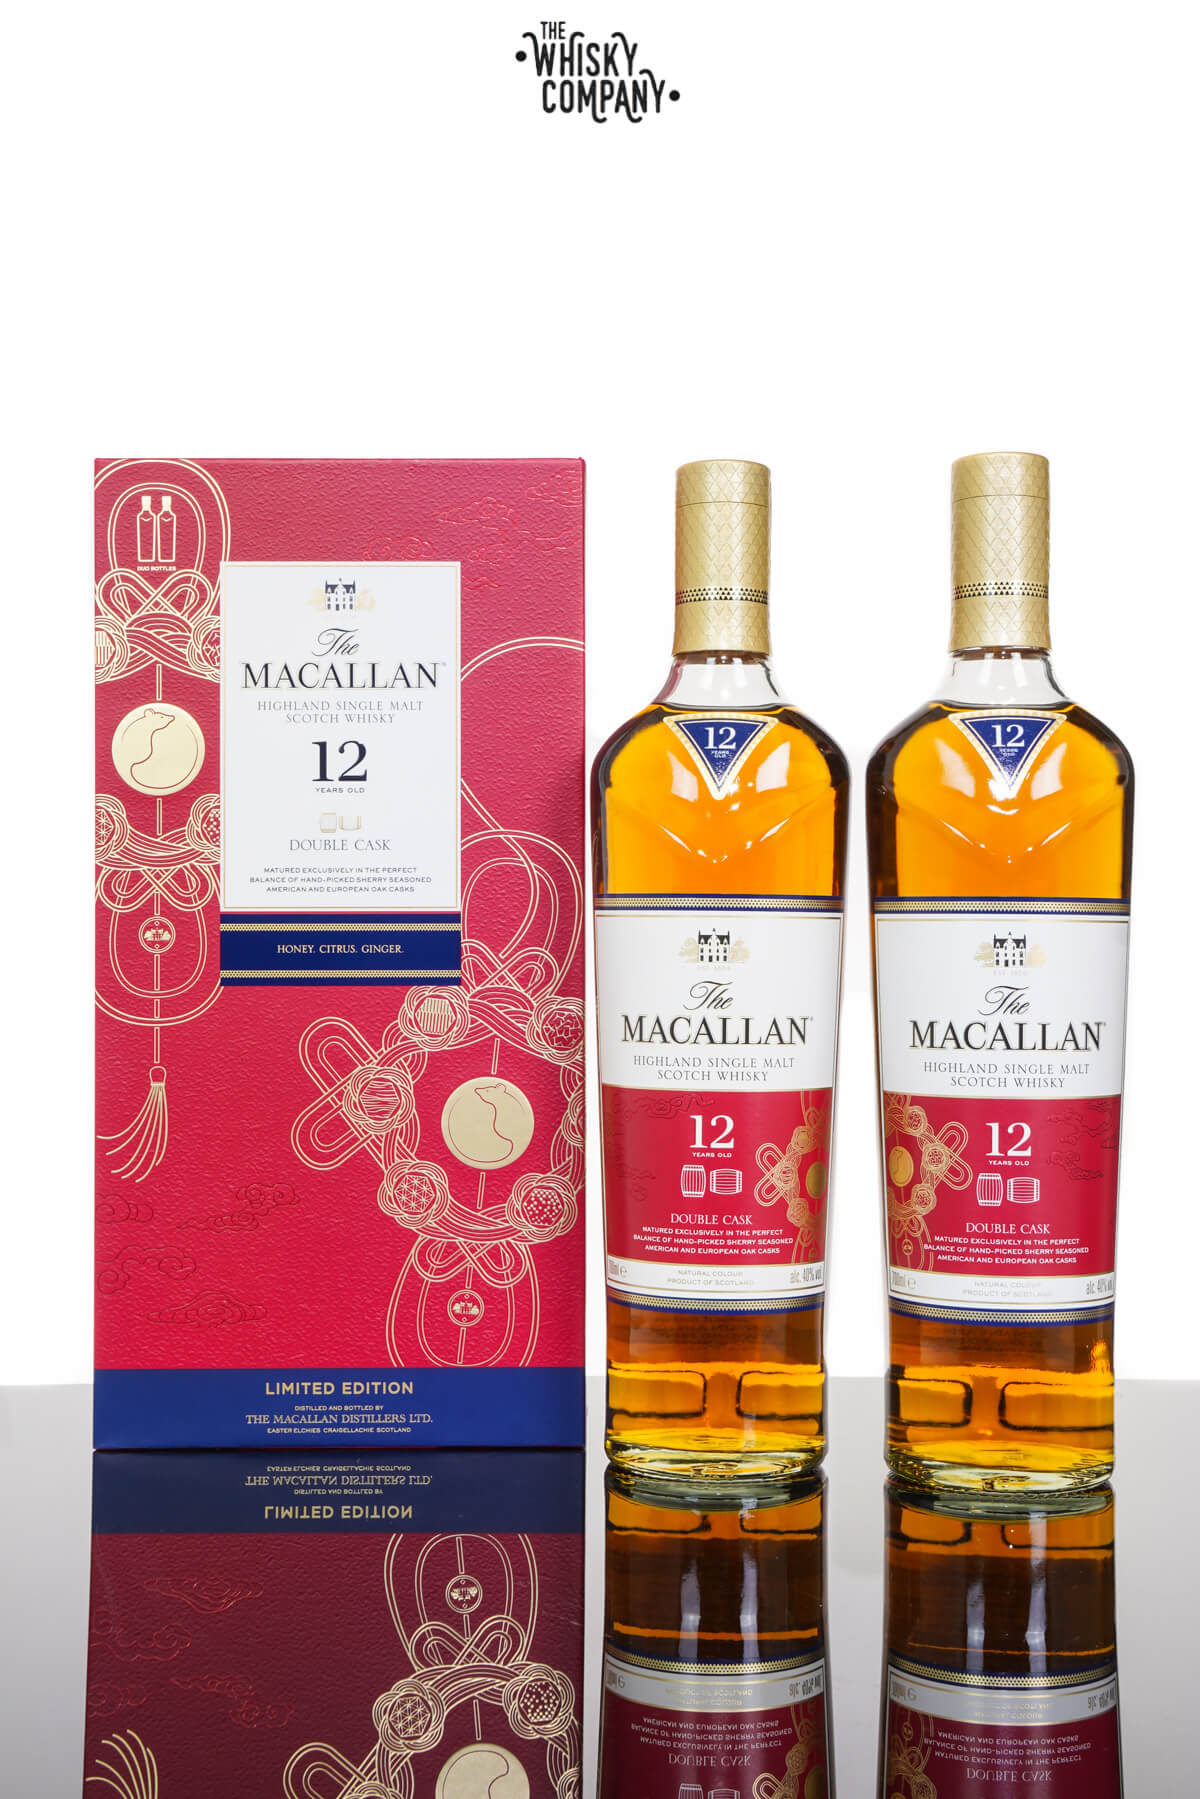 The Macallan 12 Years Old Year Of The Rat 2020 Single Malt Scotch Whisky